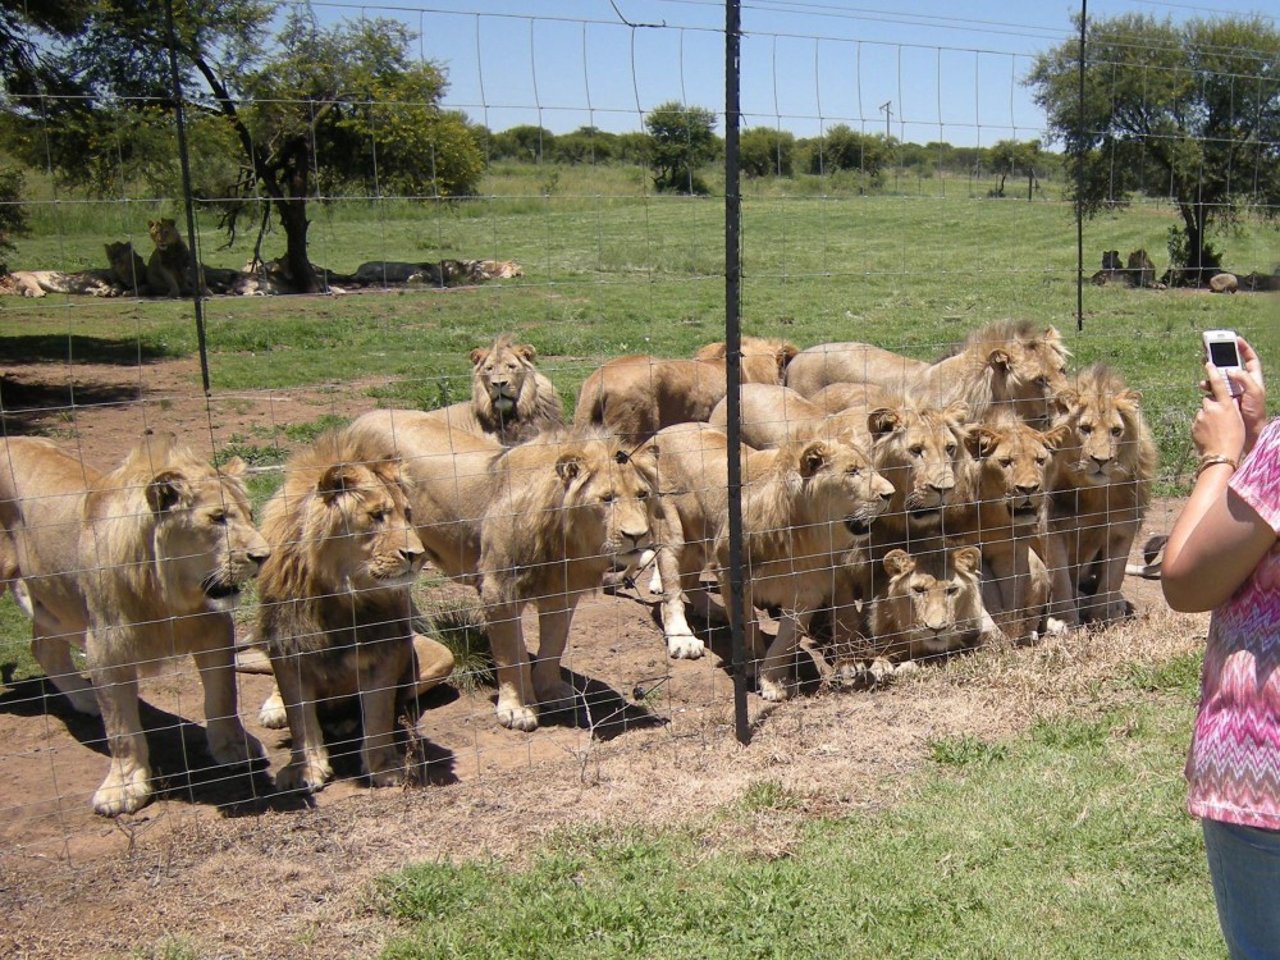 Pictured: Lions on a farm.